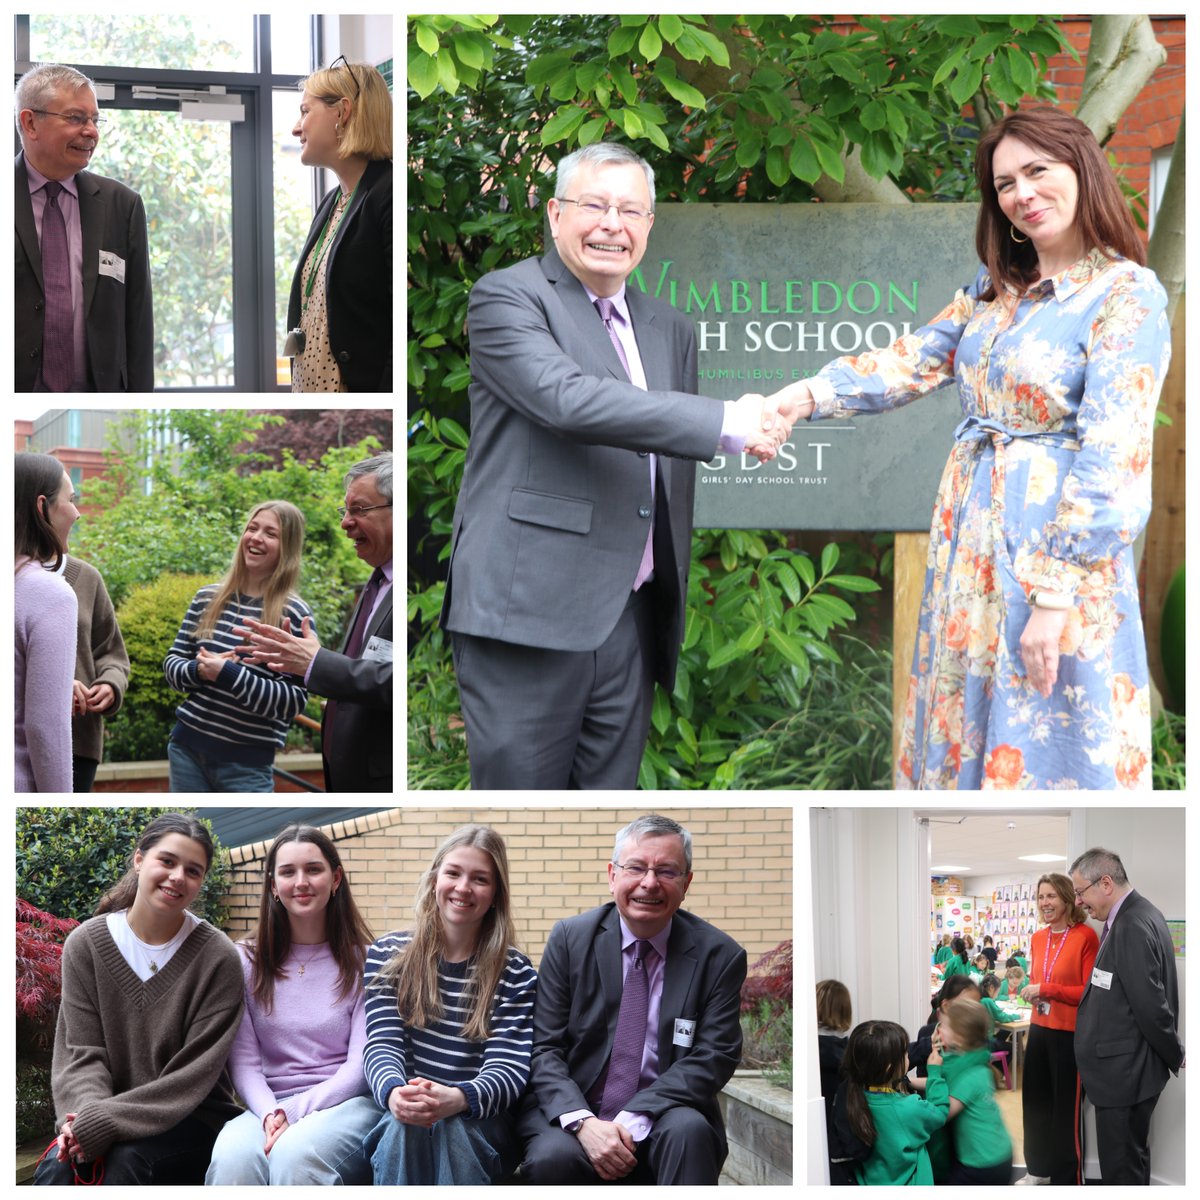 The @HMC_Org General Secretary thanks Fionnuala Kennedy @Head_WHS and her excellent colleagues at @WimbledonHigh for such a warm reception. As well as a tour of the school’s impressive new facilities, Lily, Katerina and Gracie shared their experiences and enthusiasm.